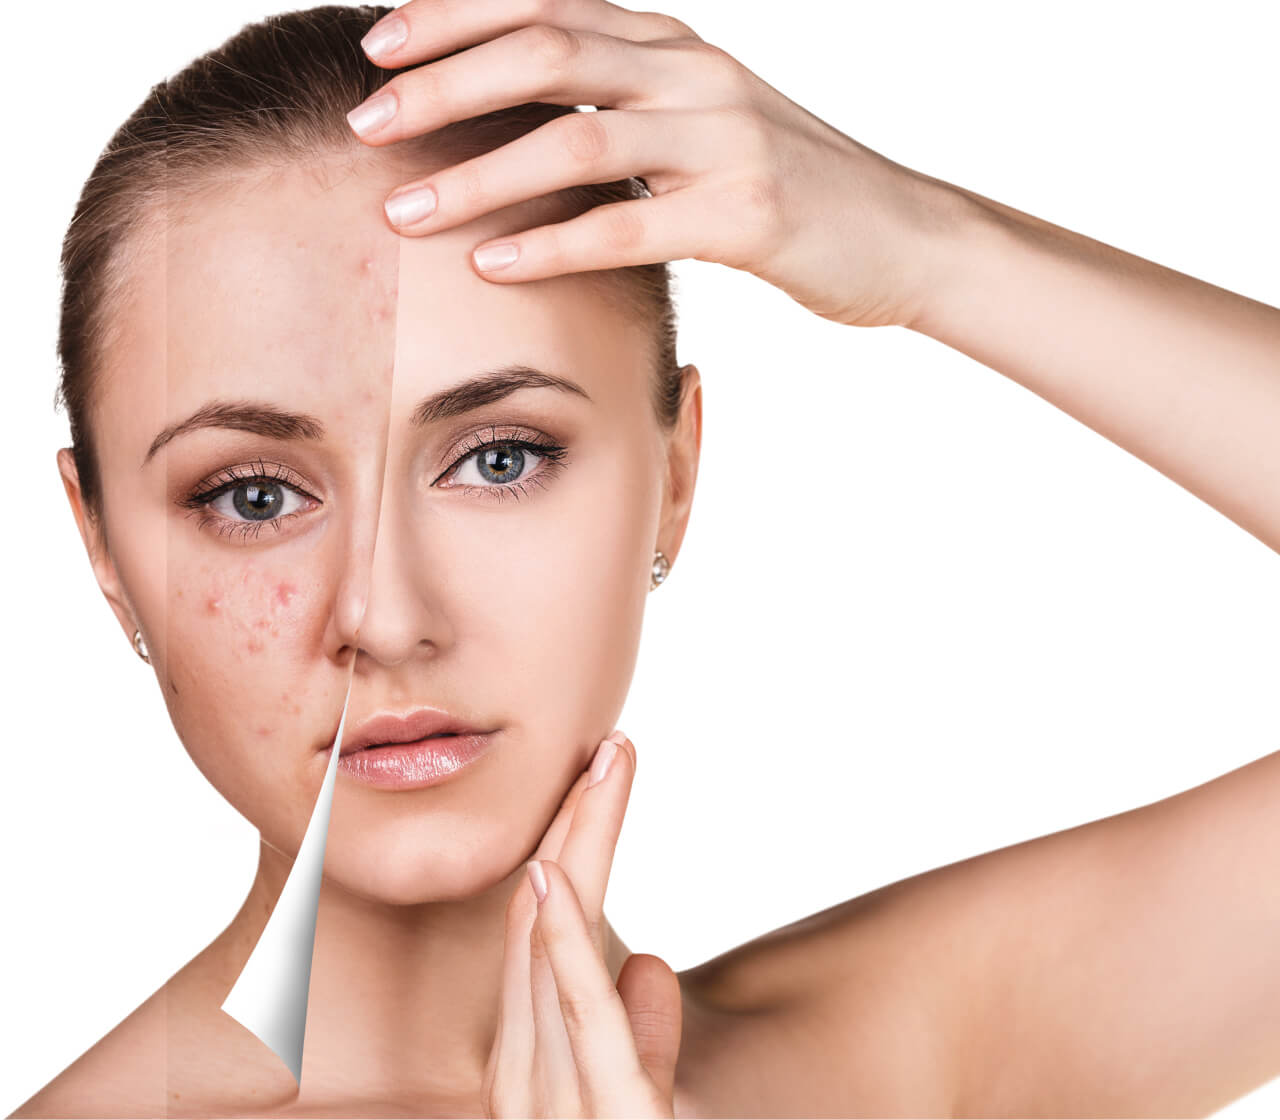 Know the best acne skin care routine - Dissolve Stress Now